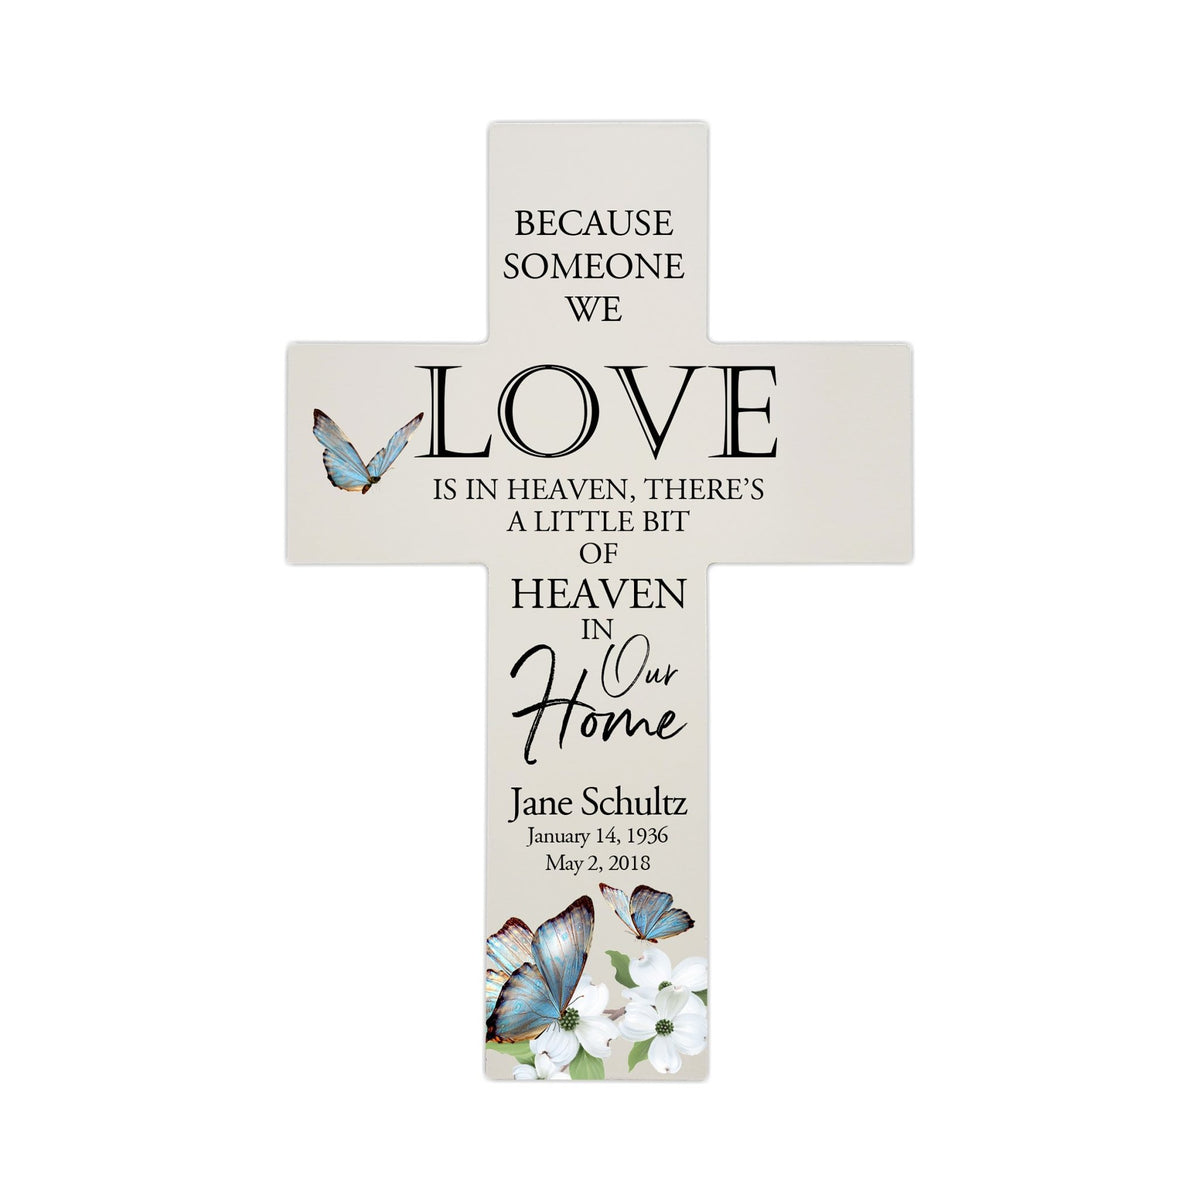 Personalized Butterfly Memorial Bereavement Wall Cross For Loss of Loved One Because Someone We Love (Butterfly) Quote 14 x 9.25 Because Someone We Love Is In Heaven, There&#39;s A Little Bit Of Heaven In Our Home - LifeSong Milestones